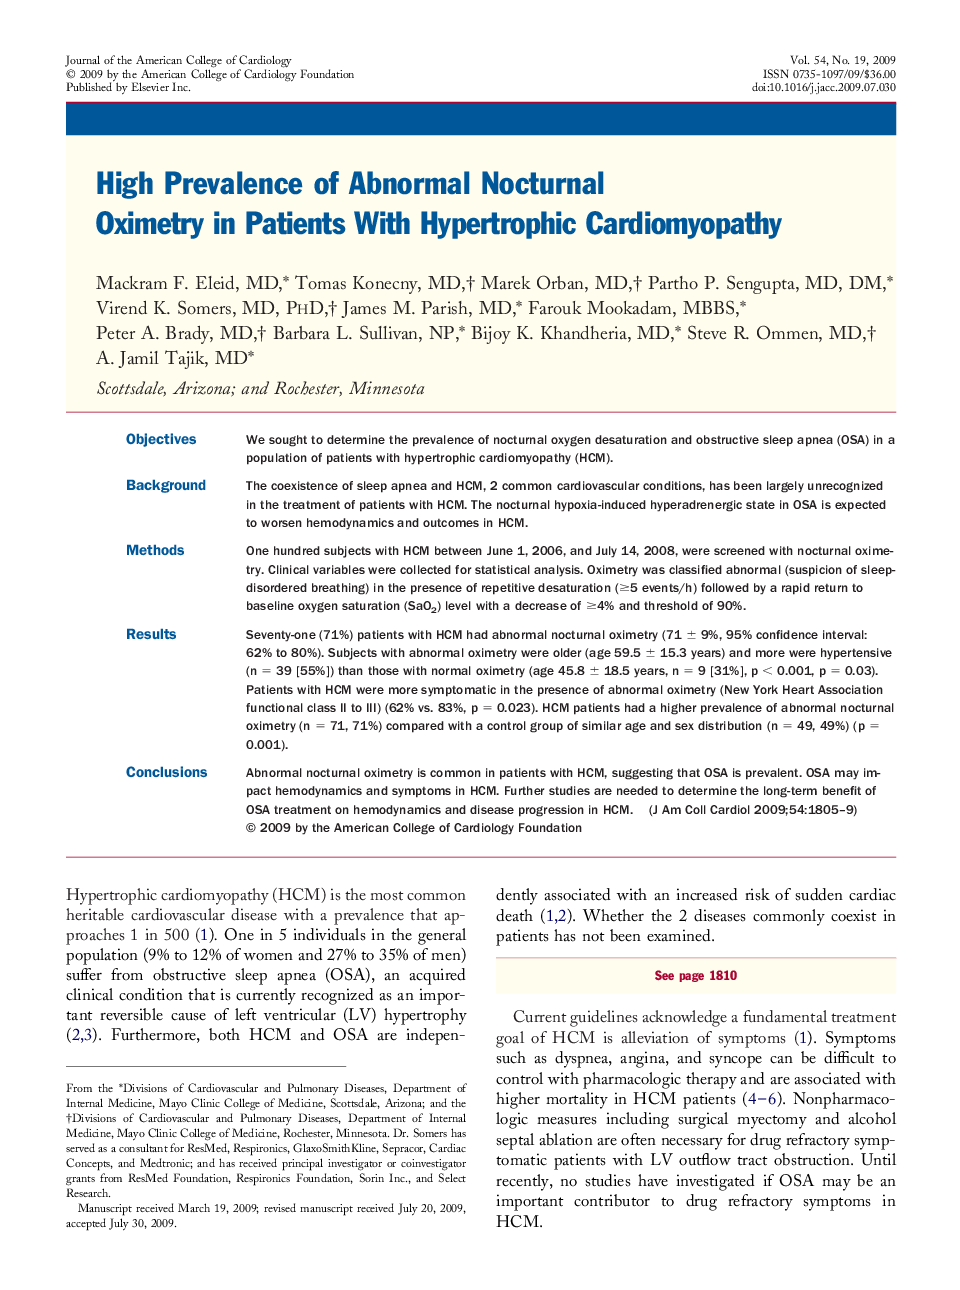 High Prevalence of Abnormal Nocturnal Oximetry in Patients With Hypertrophic Cardiomyopathy 